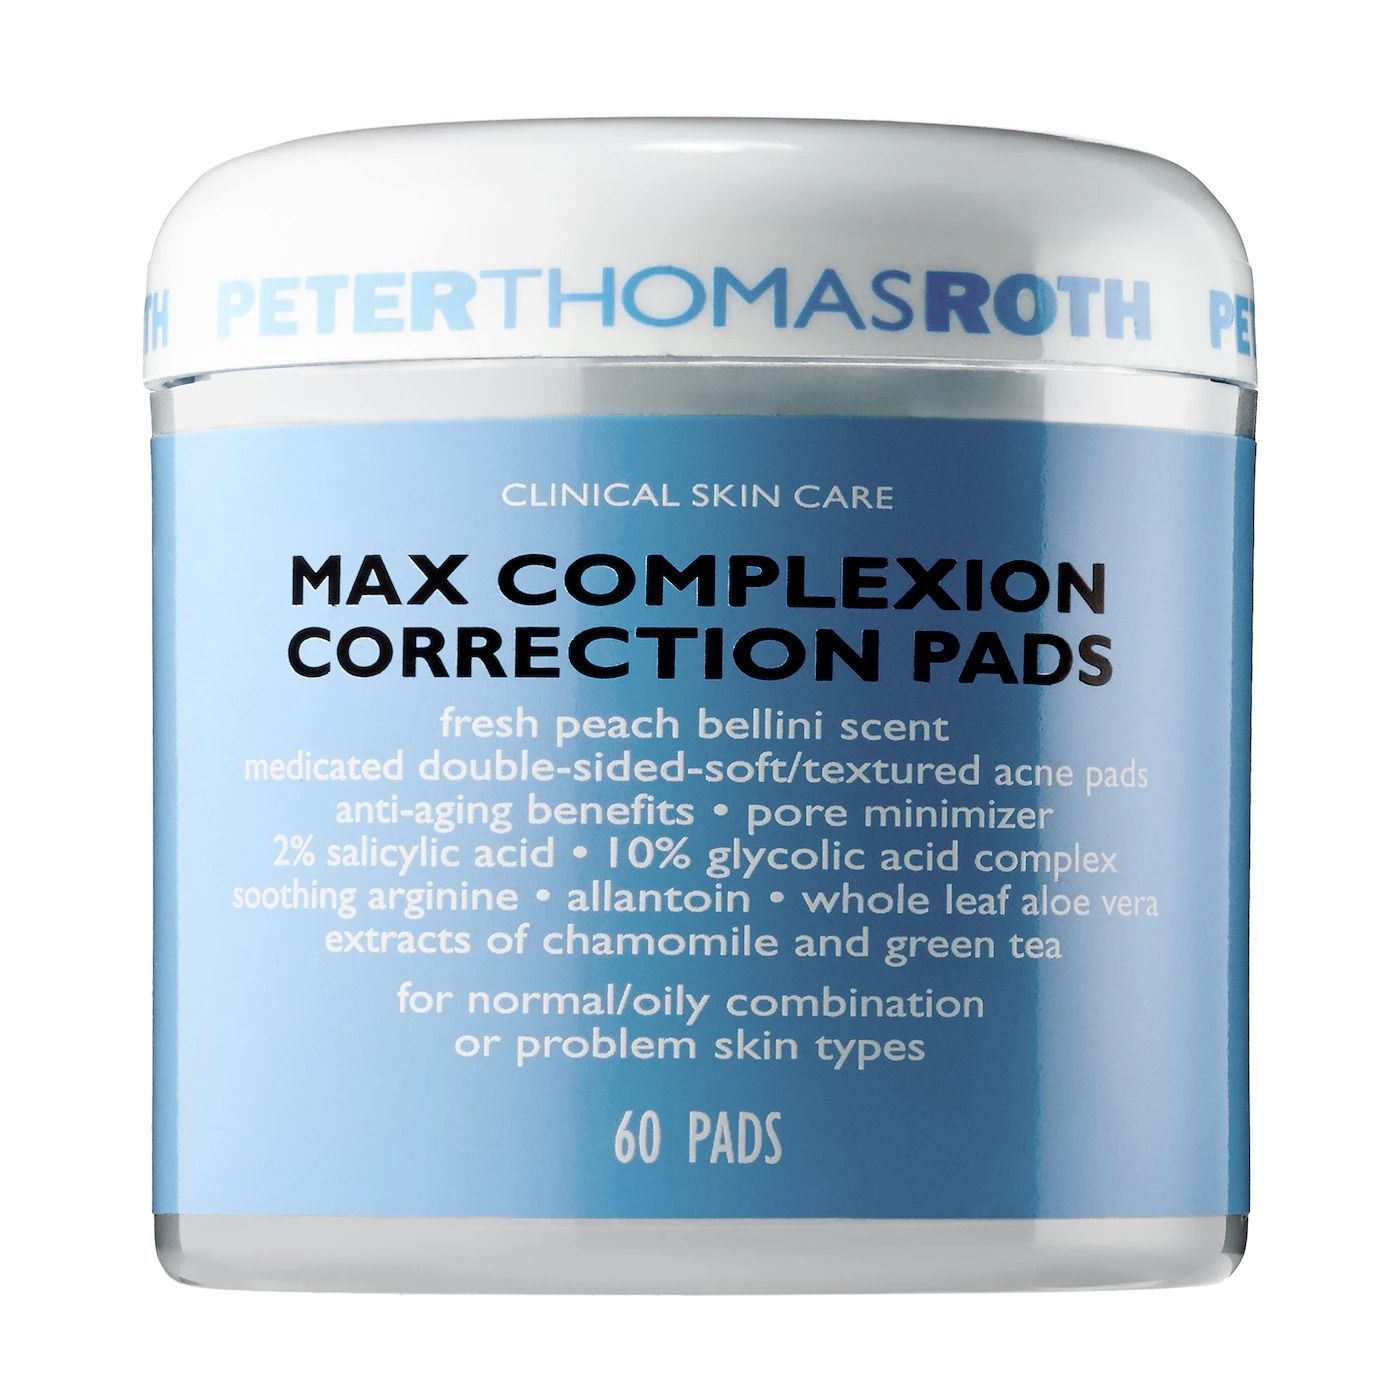 Peter Thomas Roth Max Complexion Salicylic Acid Pore Refining Pads